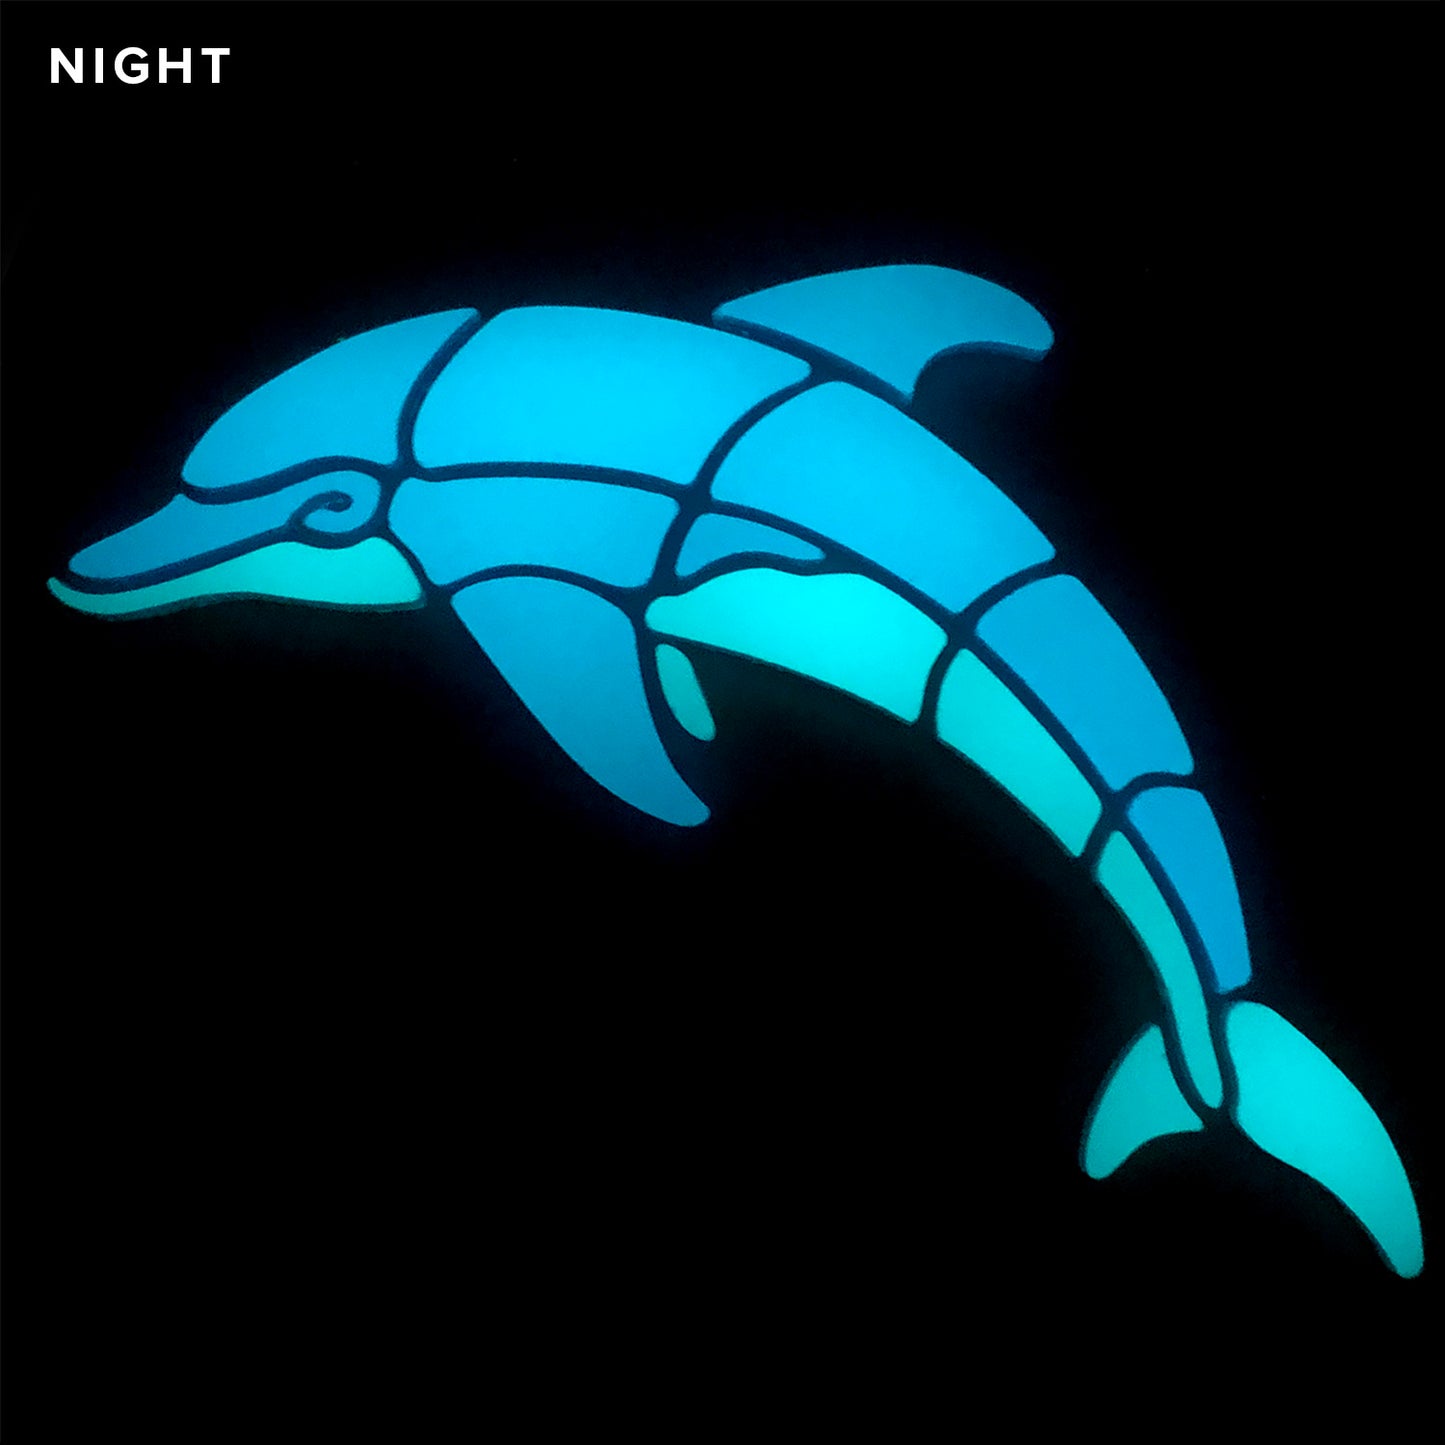 Playful Dolphin Glow in the Dark Pool Mosaic